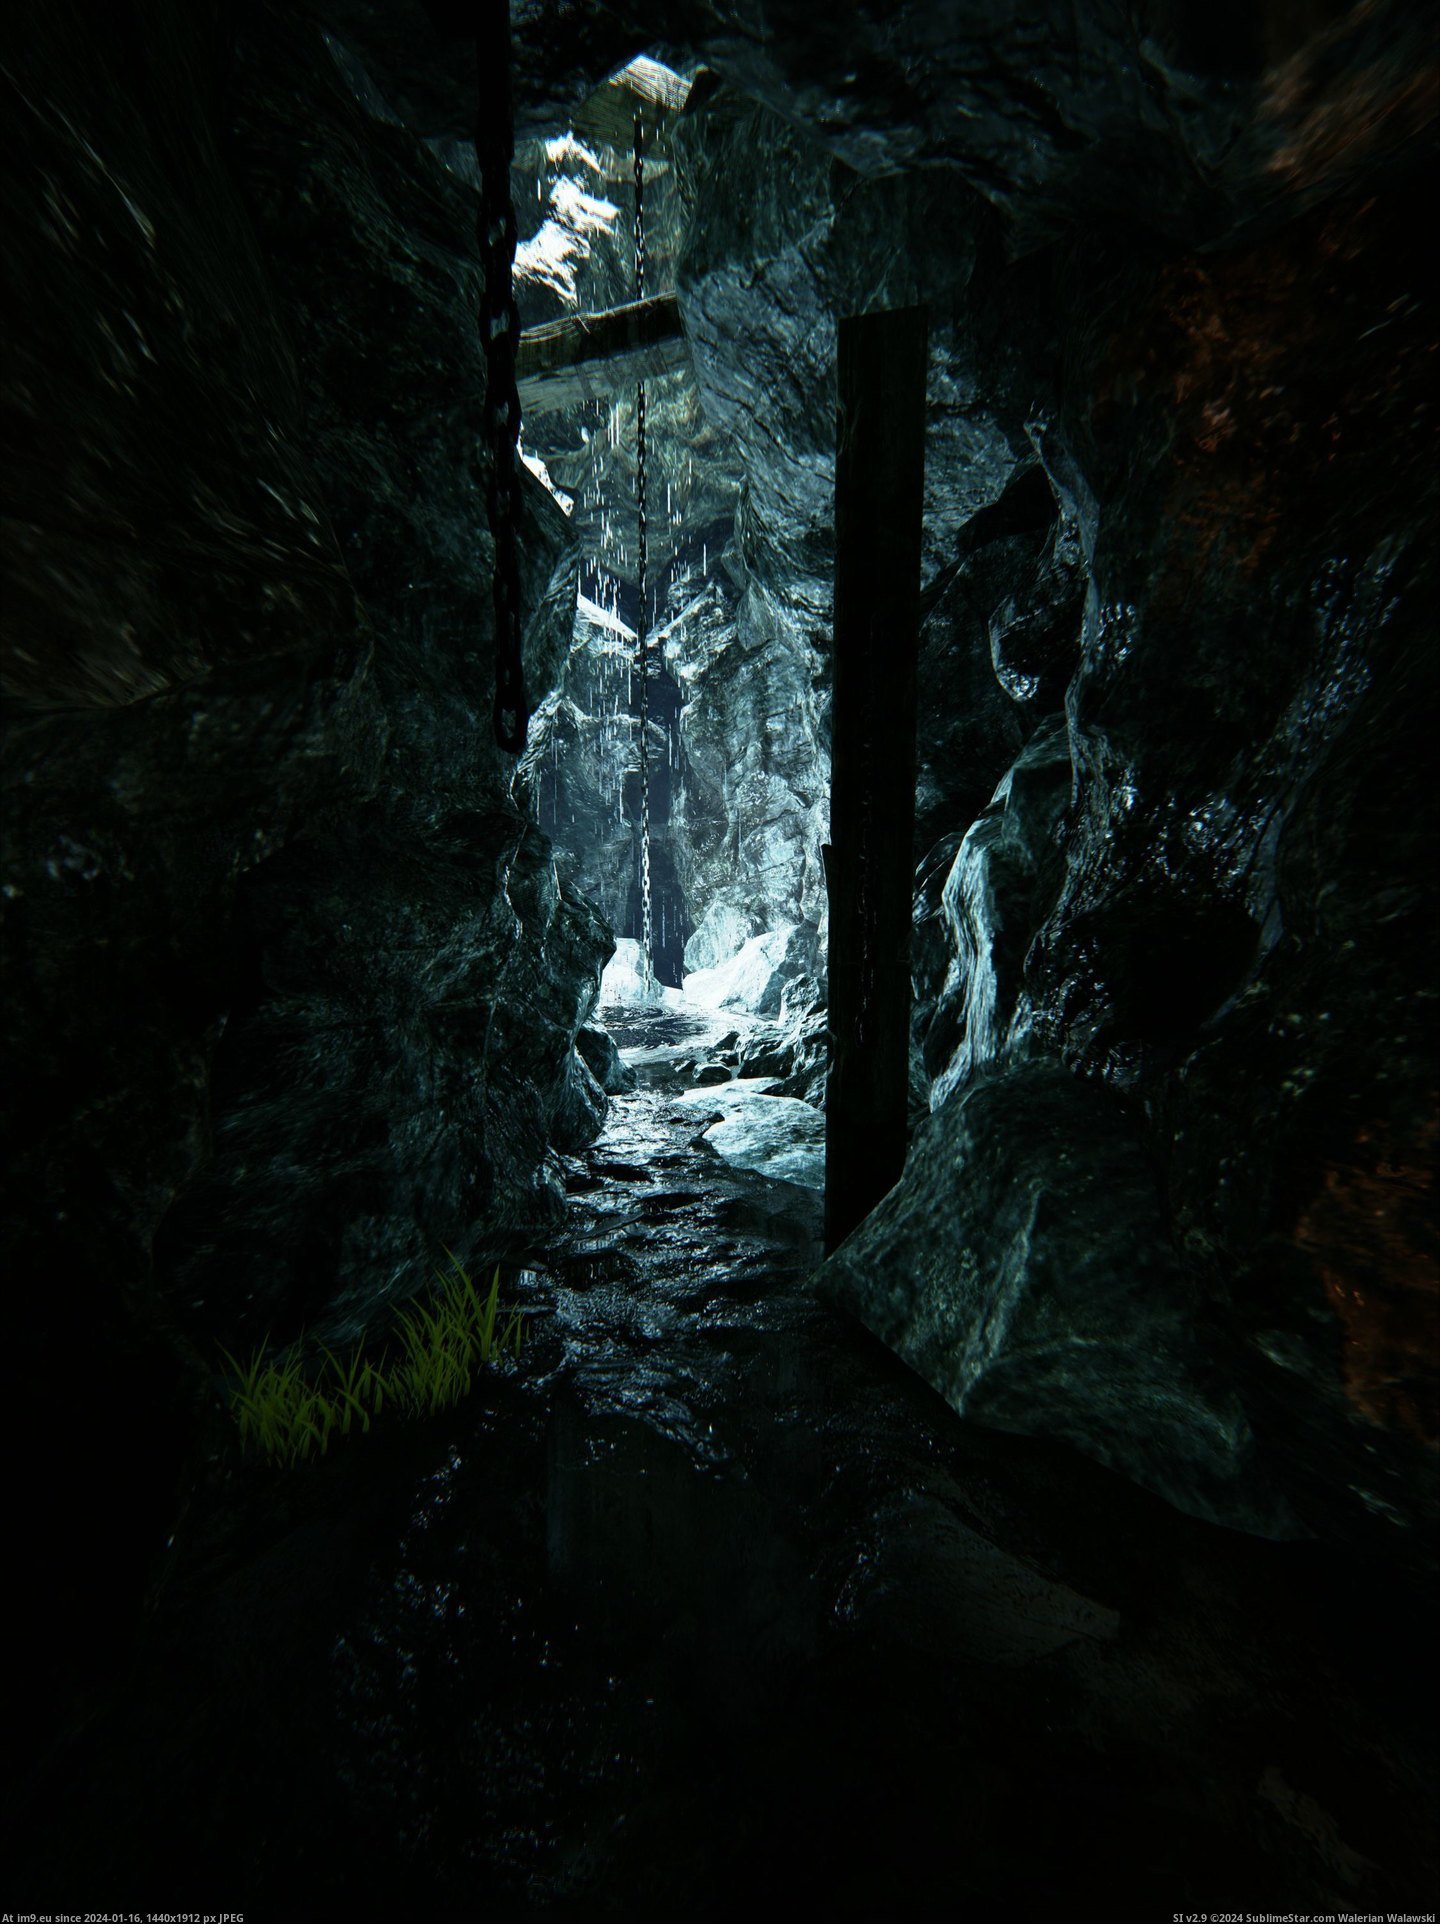 #Gaming #Screenshots #Resolution #Released #Newly #Running #Engine #Unreal [Gaming] Newly released screenshots from Unreal Engine 4 running at 8K resolution 9 Pic. (Image of album My r/GAMING favs))